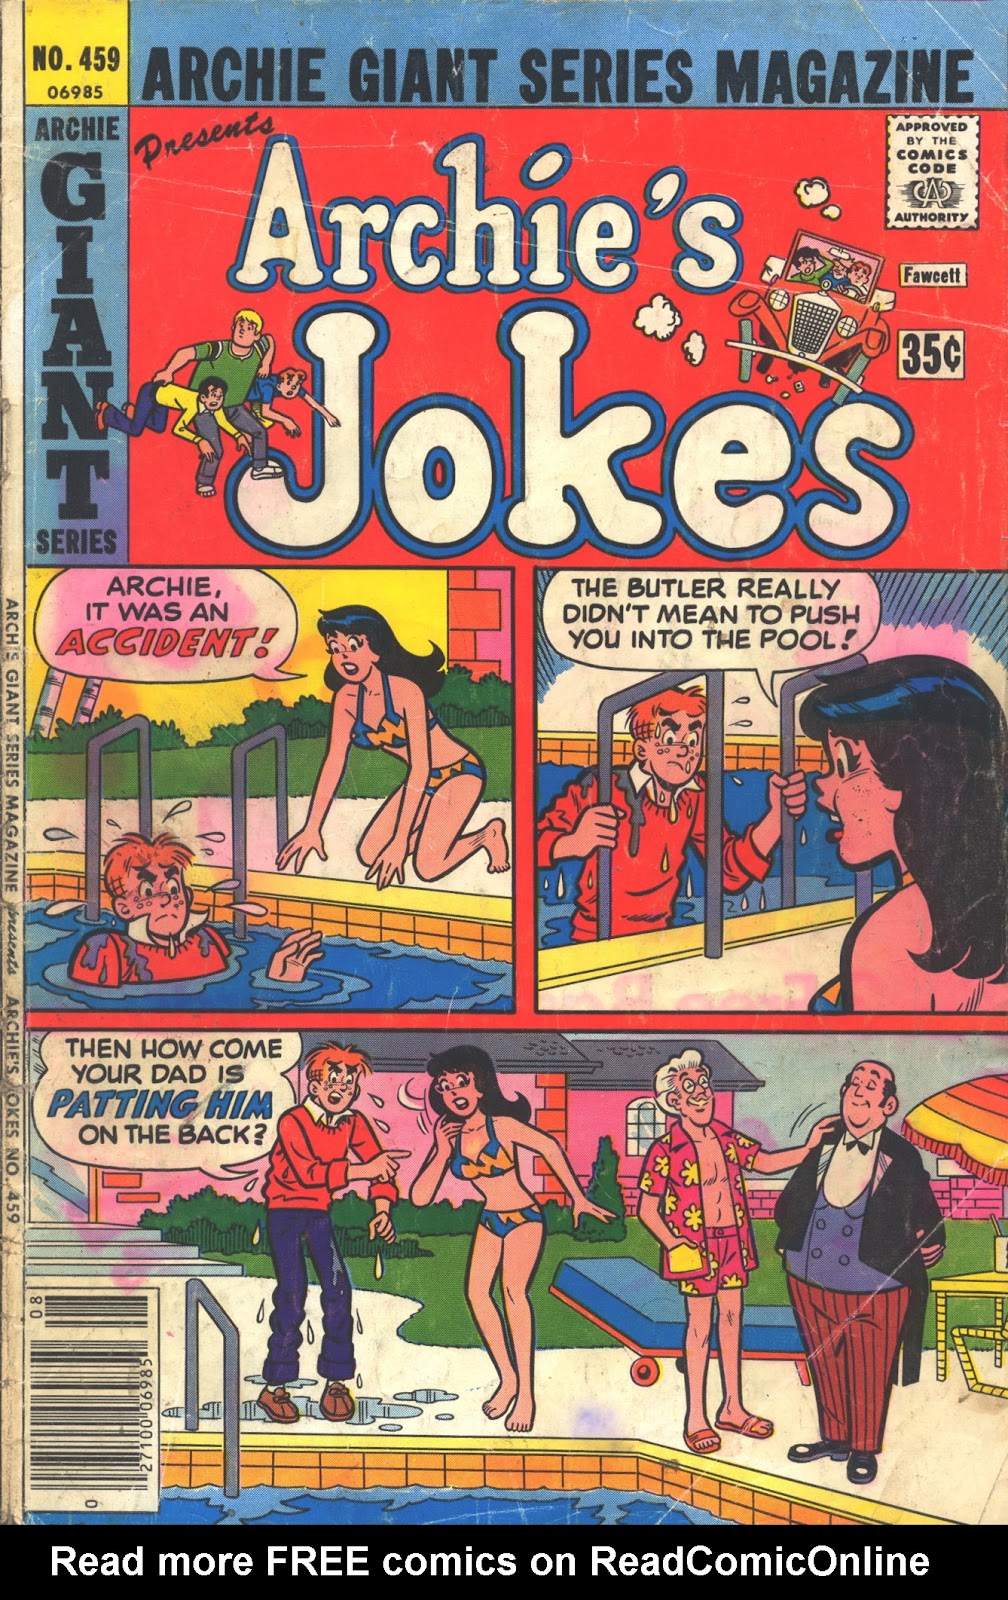 Archie Giant Series Magazine 459 Page 1